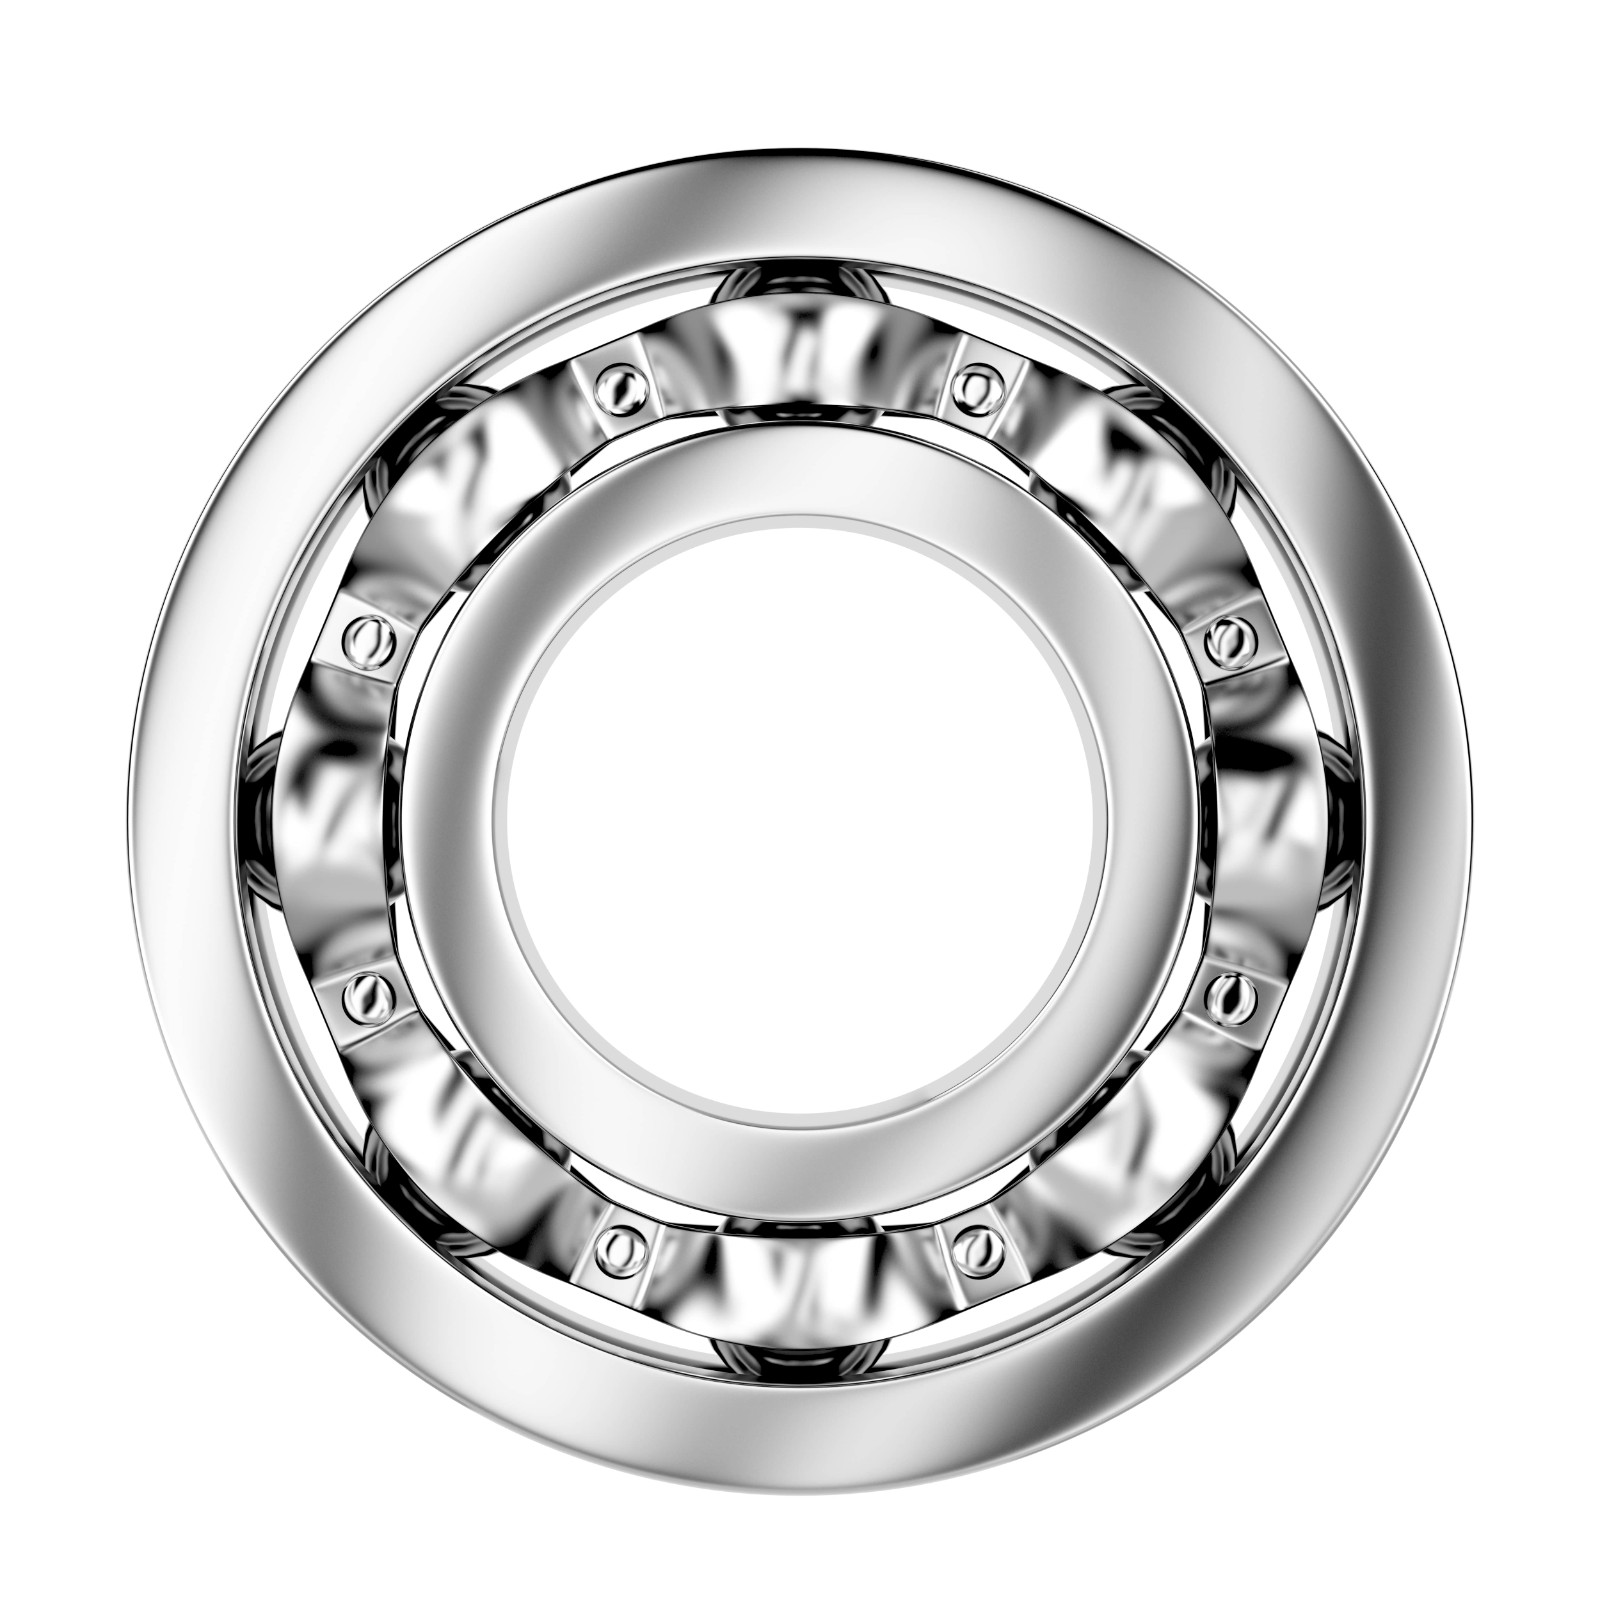 side-view-of-ball-bearing-PKUHPFE.jpg